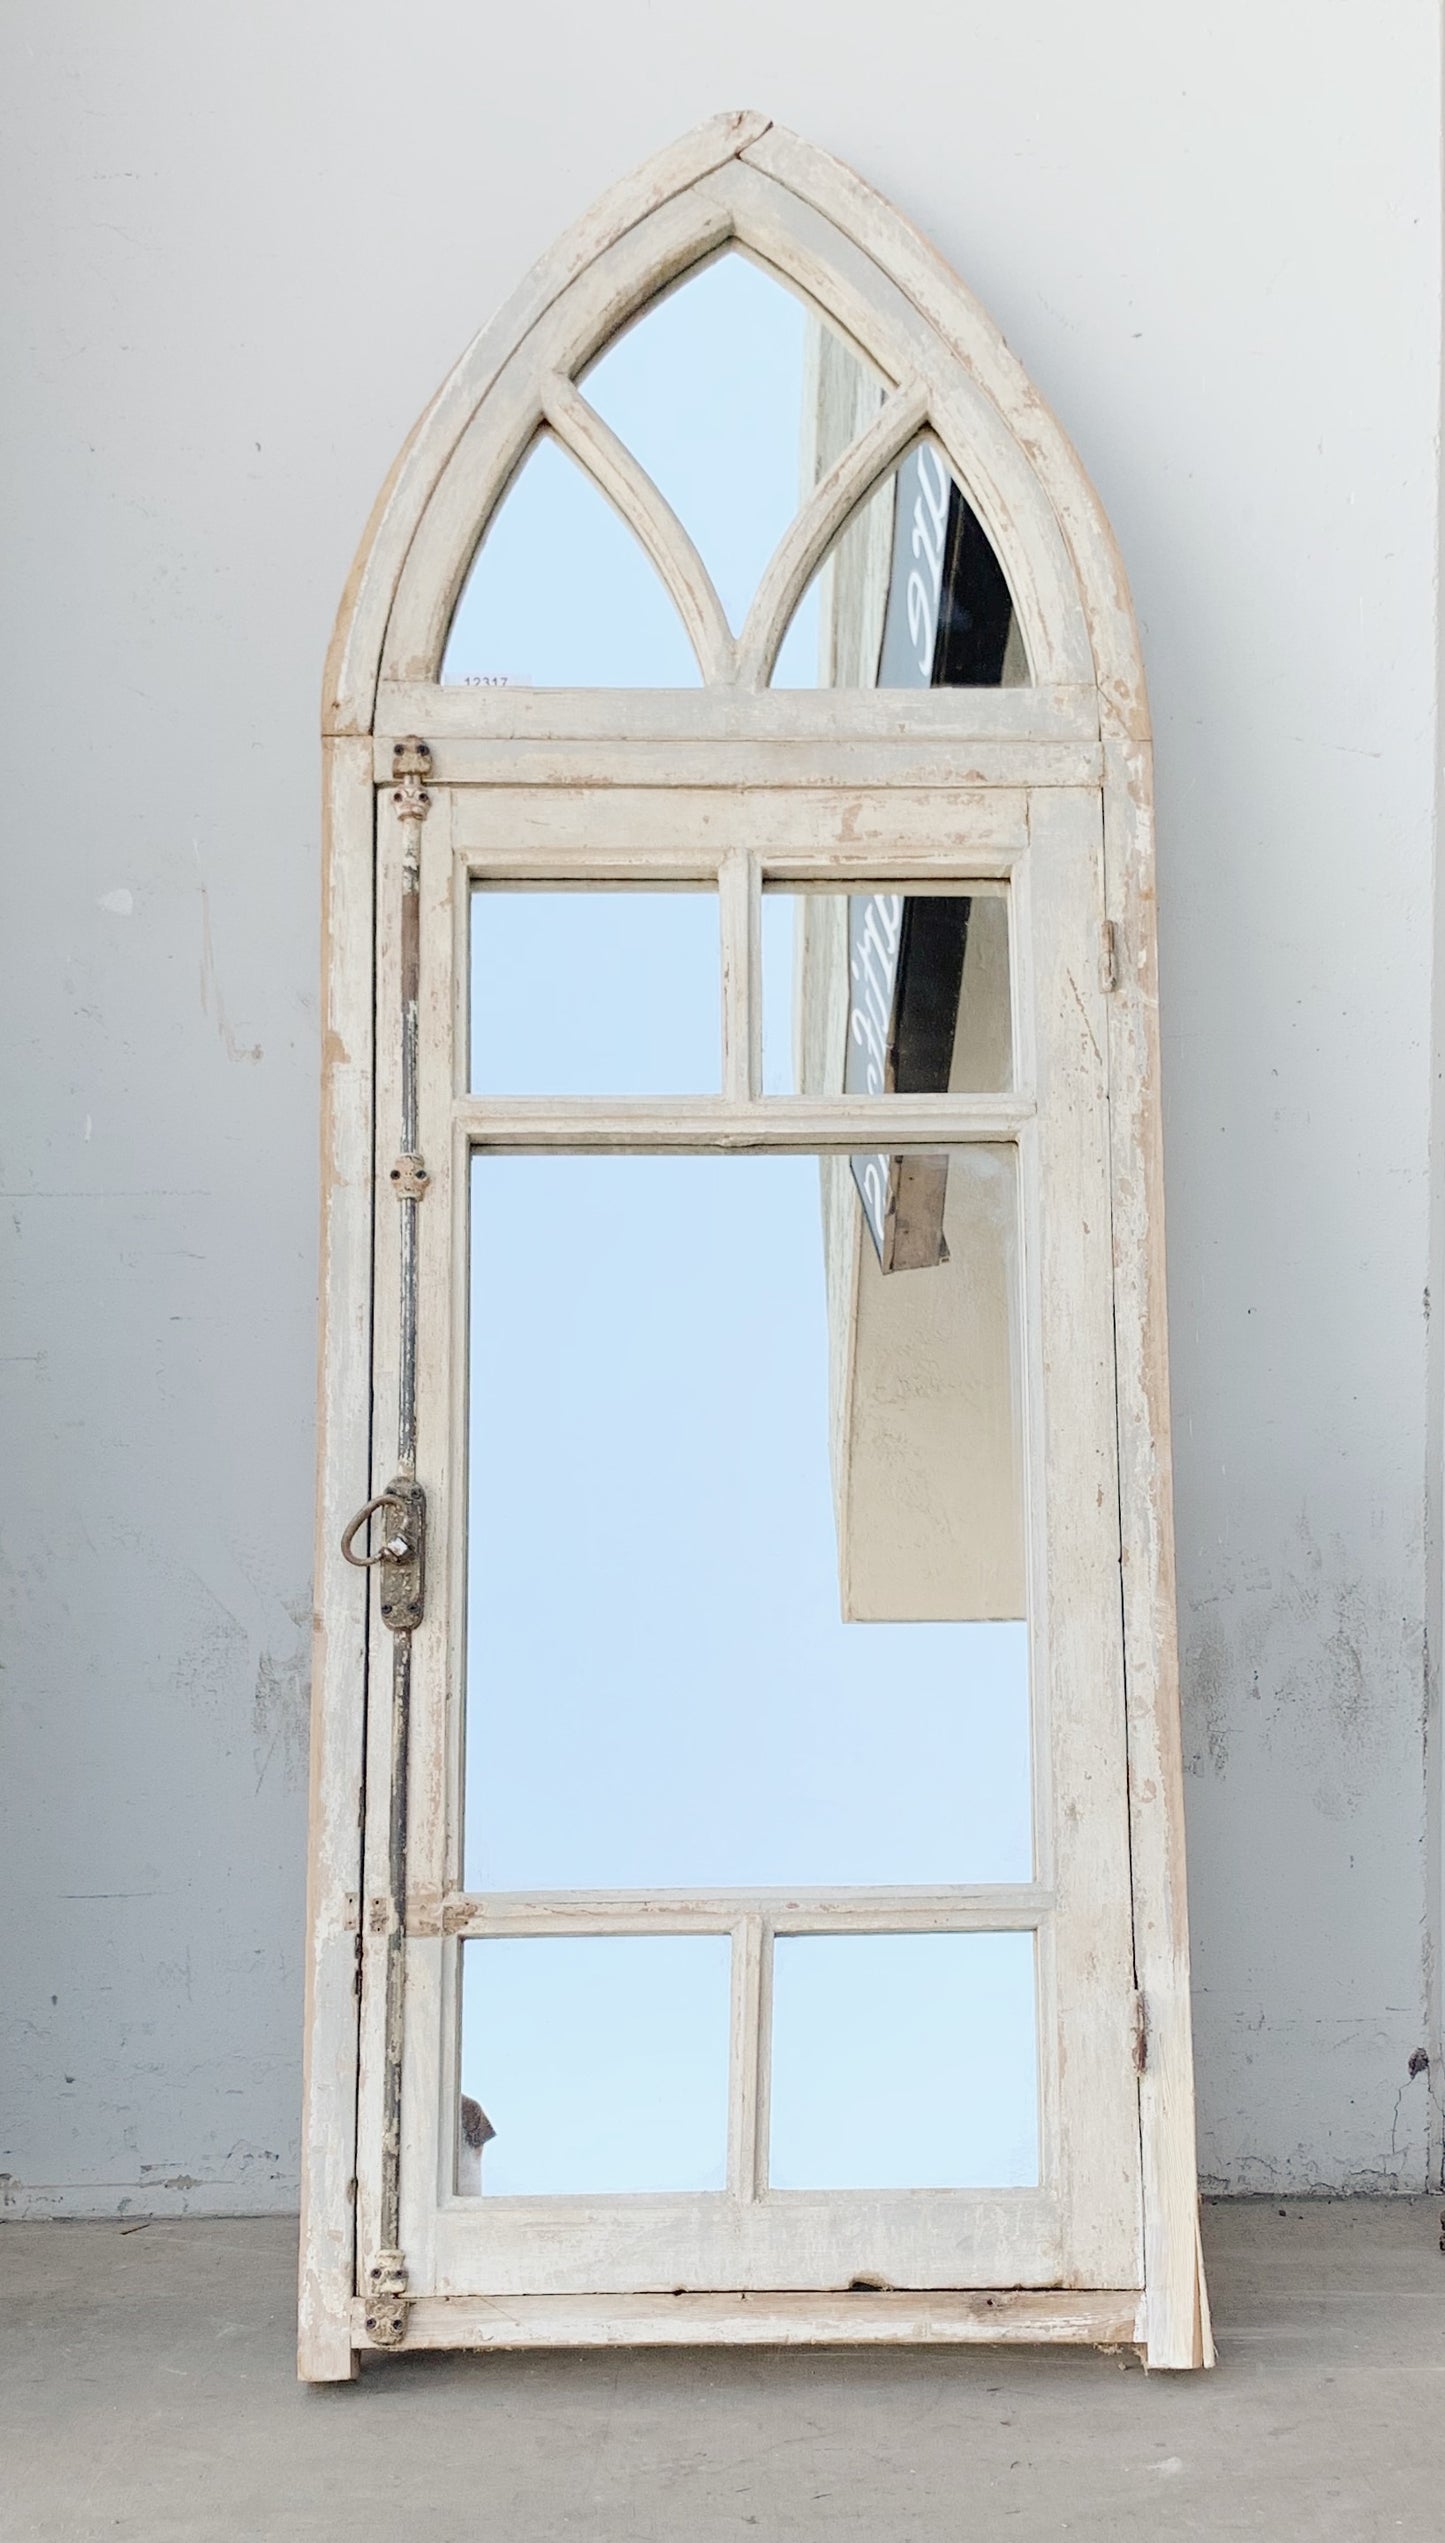 8 Pane White Arched Gothic Style Mirrored Window with Transom